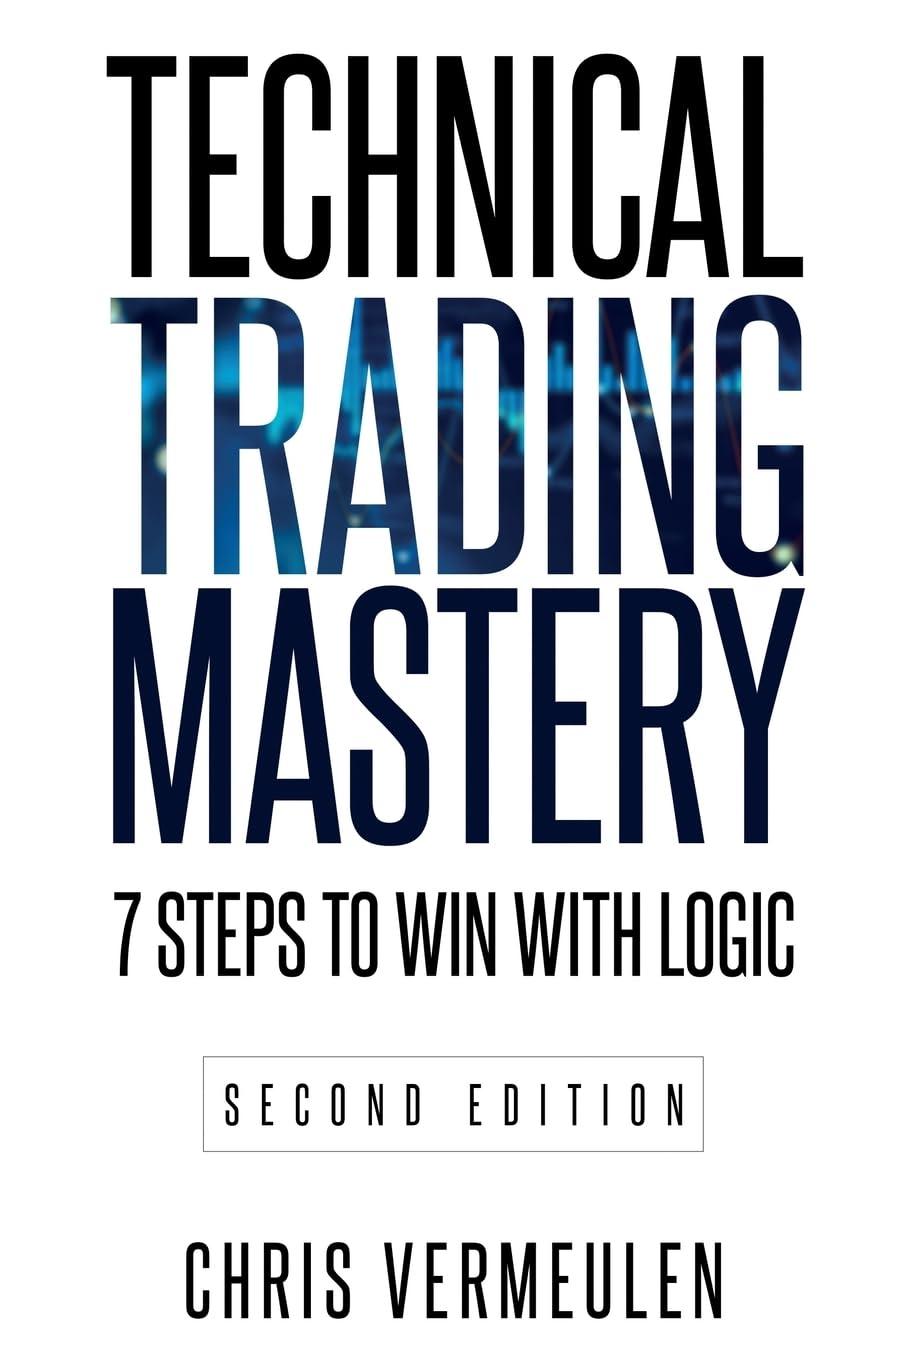 technical trading mastery 7 steps to win with logic 2nd edition chris vermeulen 1738943909, 978-1738943906